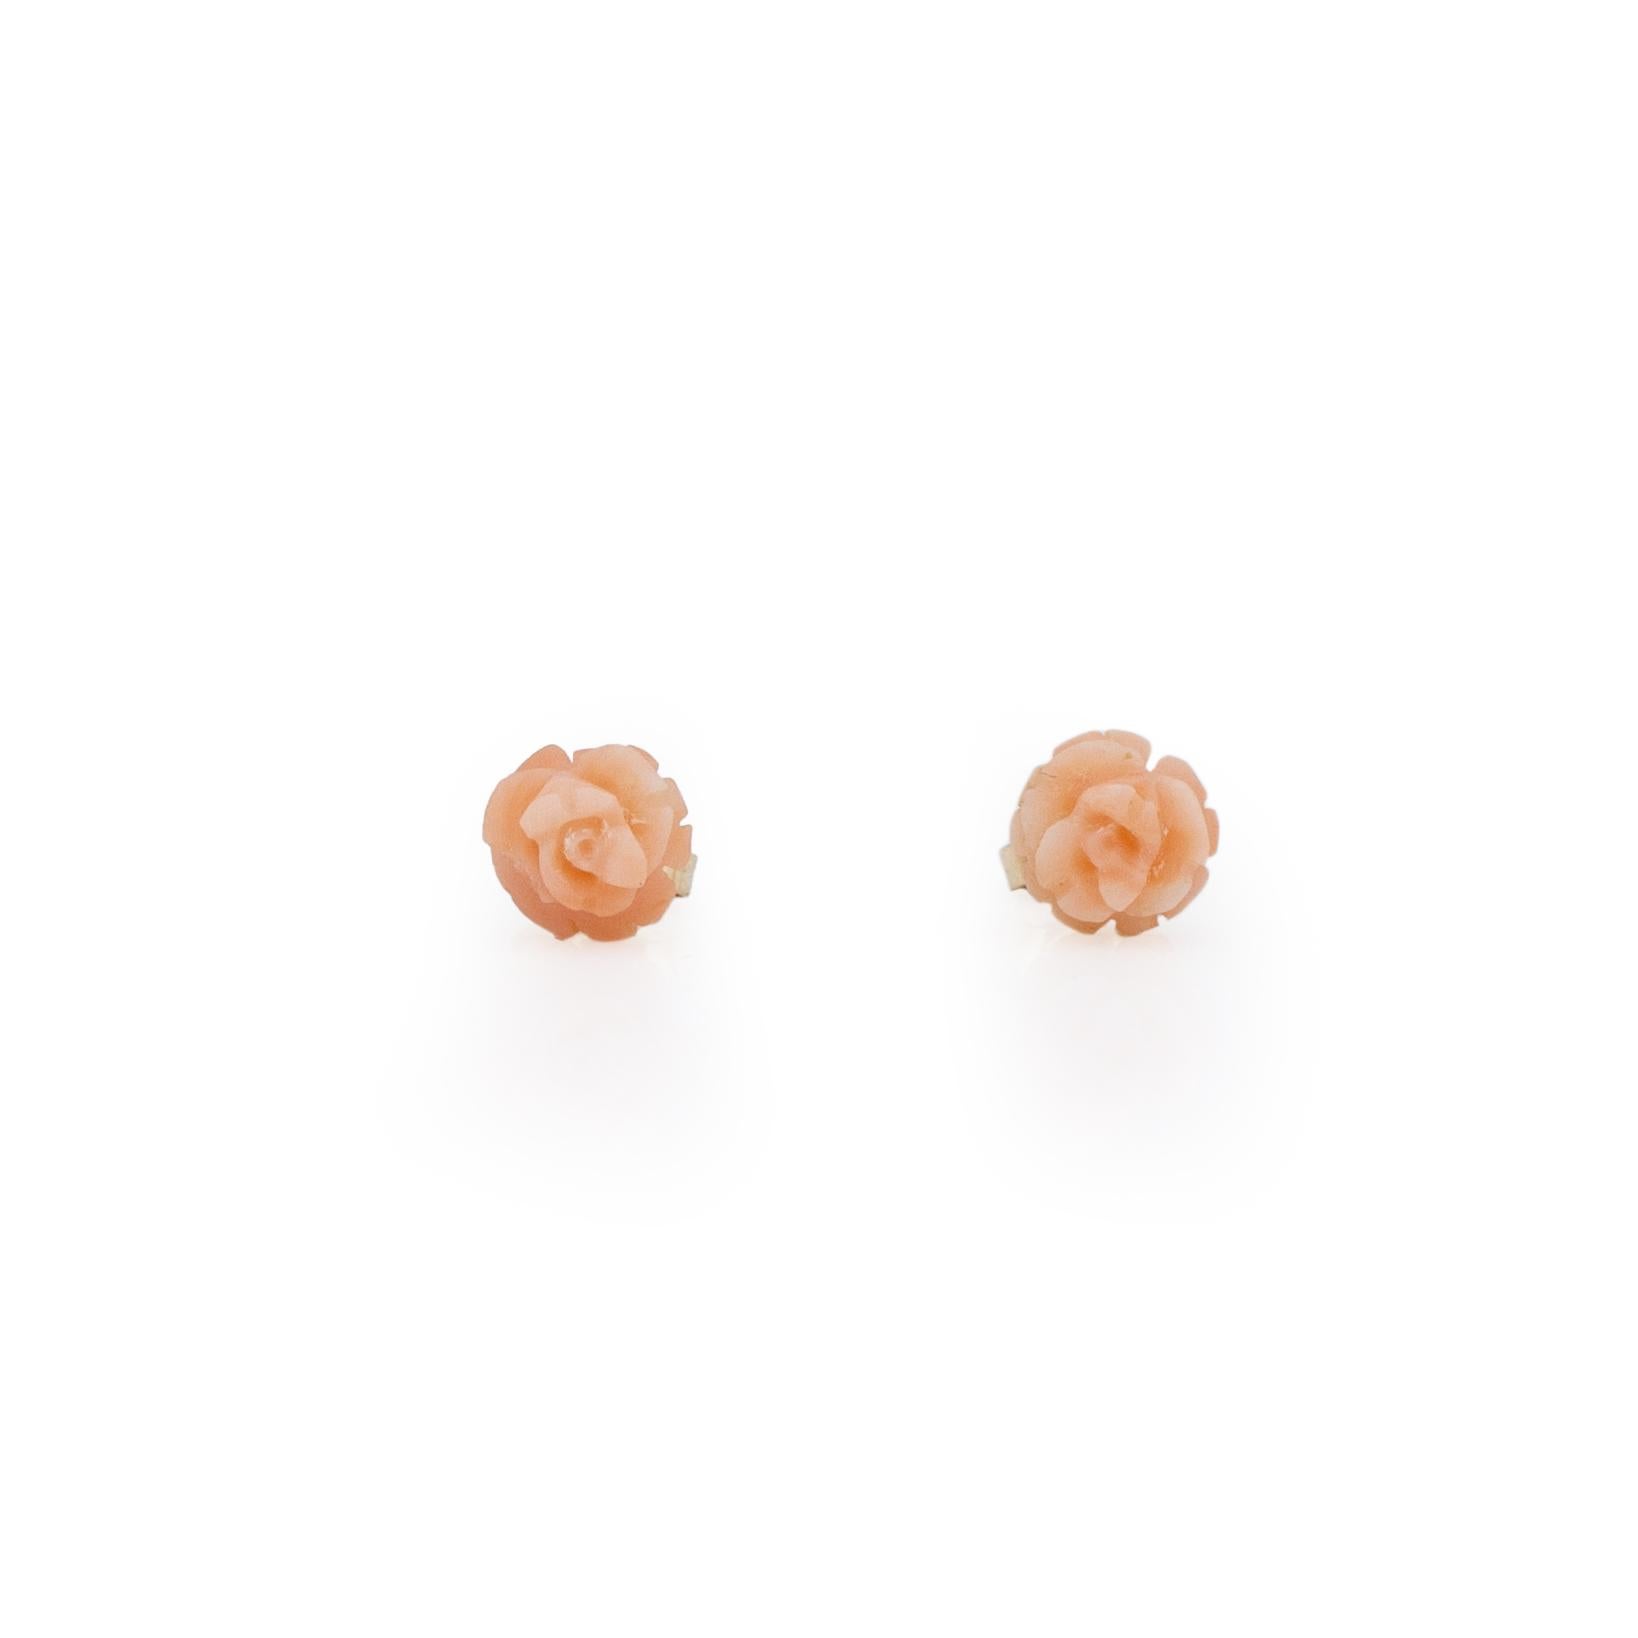 These little beauties are exquisite! I like the peachy pink color of the carved coral roses. A fun addition to any wardrobe. Behind the elegantly carved coral rose is a 14K yellow gold post, perfect for everyday wear. These earrings a light weight